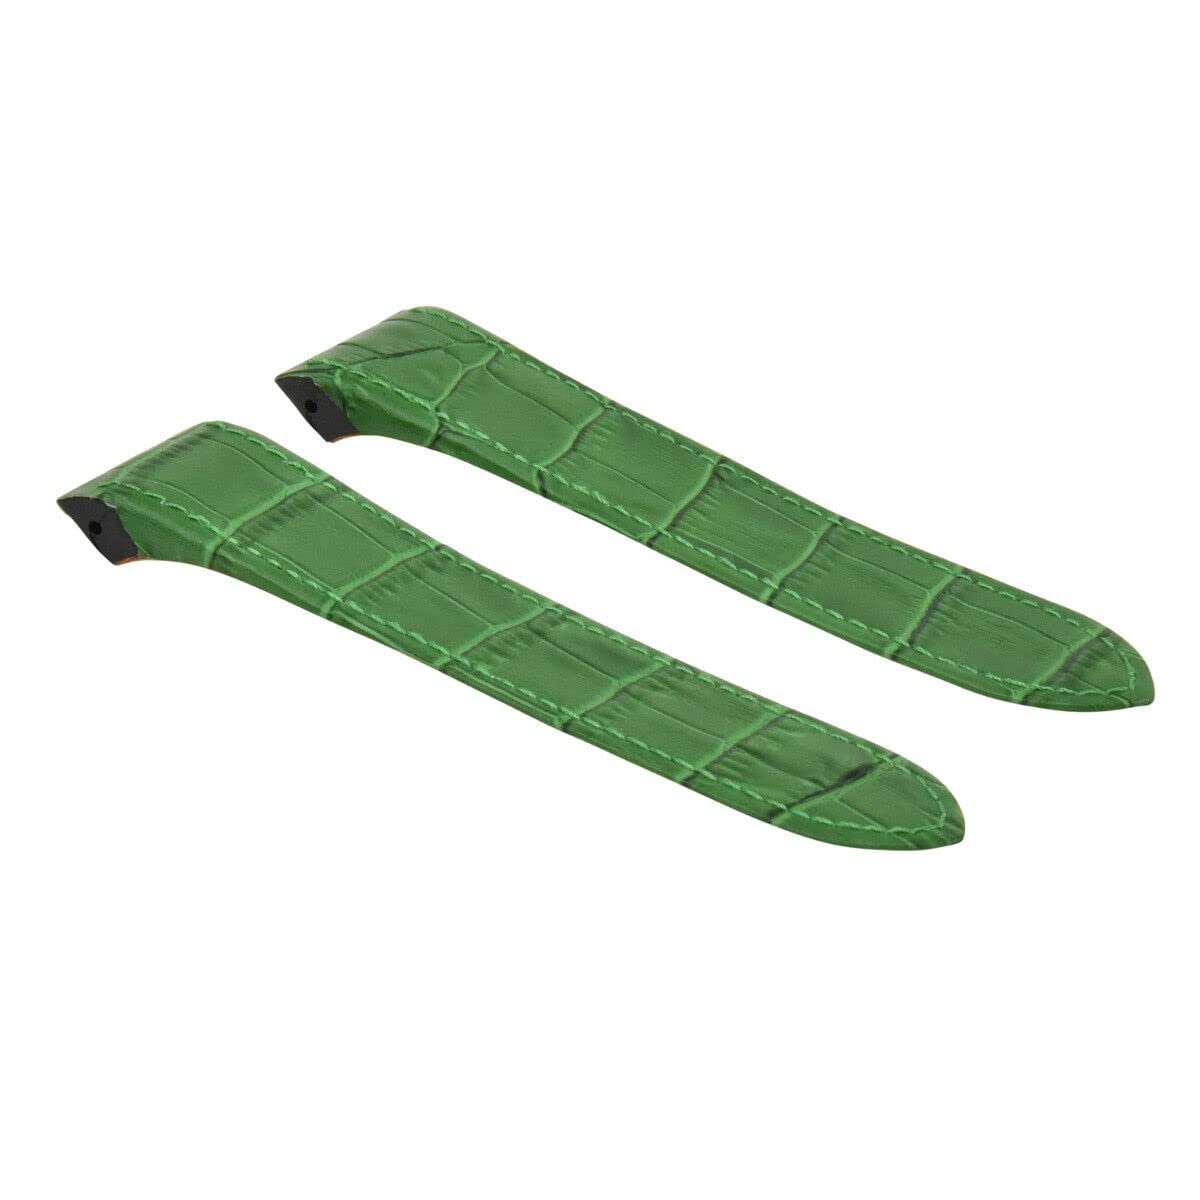 Ewatchparts 23MM LEATHER WATCH STRAP ALLIGATOR BAND COMPATIBLE WITH 38MM CARTIER SANTOS 100 XL GREEN